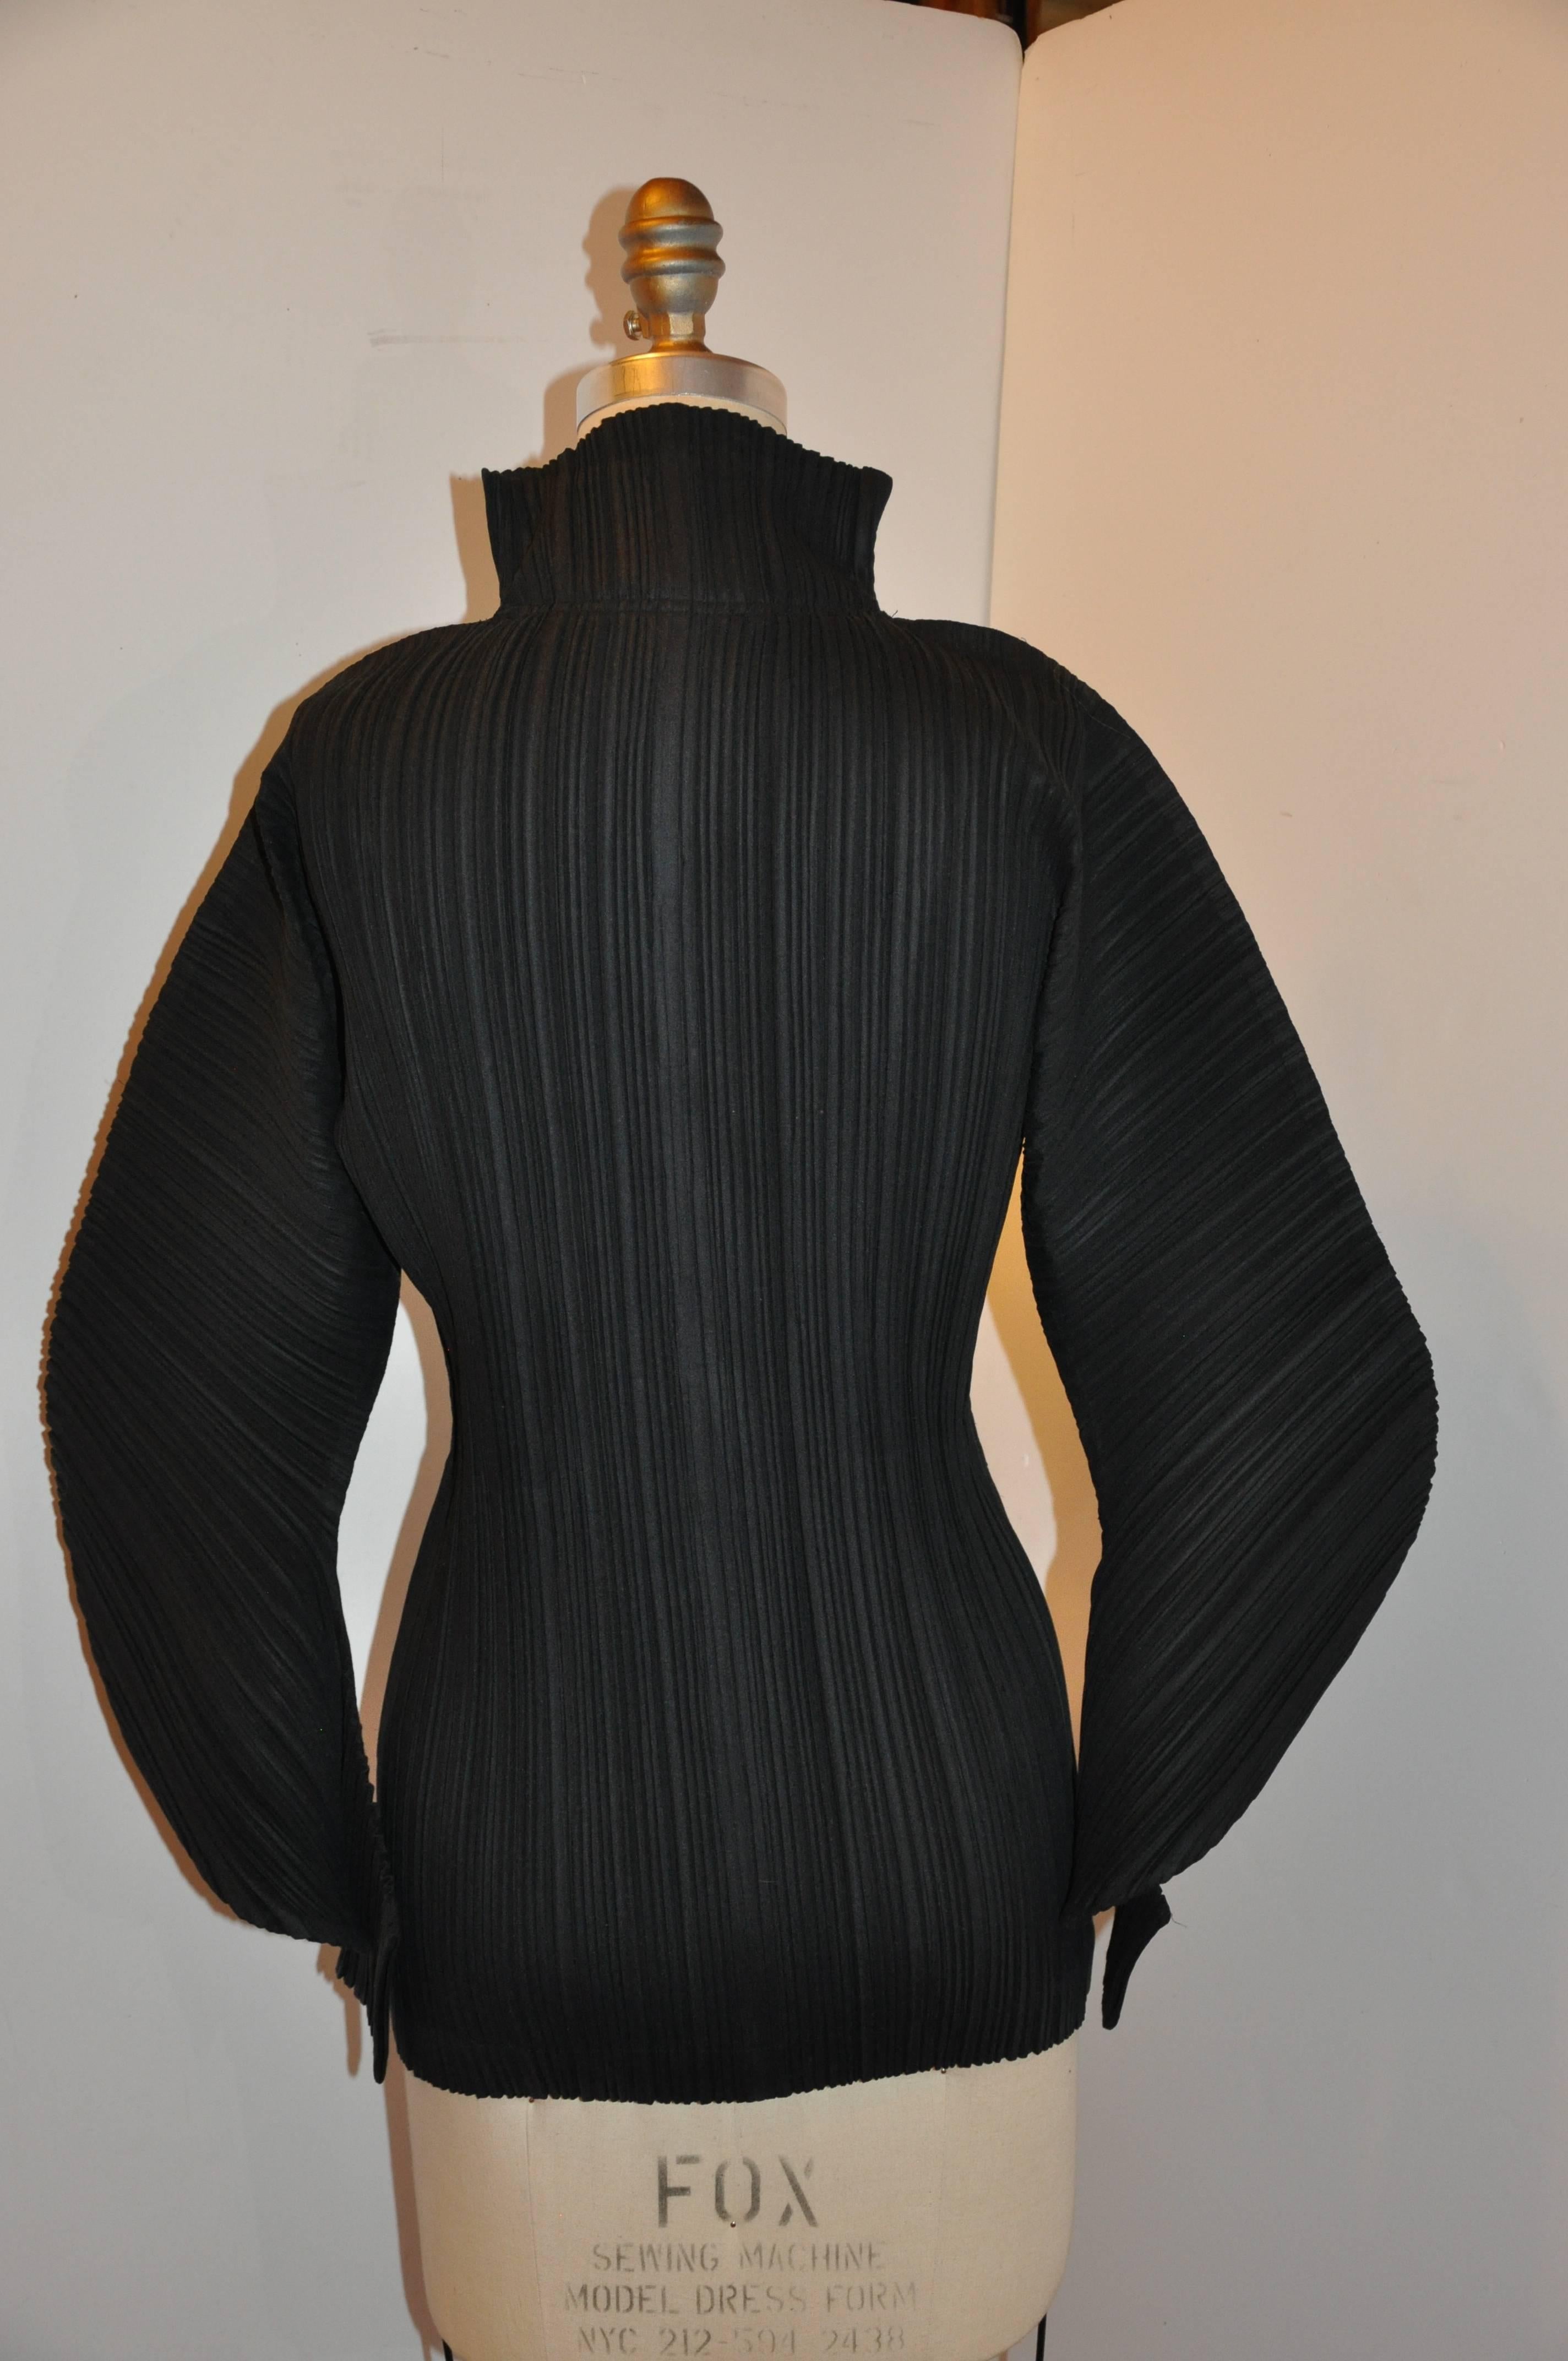        Issey Miyake wonderful signature black double zipper high neck zipper-front optional top or jacket accented with deconstructed sleeves measures 28 inches in length on the front, and 29 inches in back. Underarm circumference measures 32 to 44